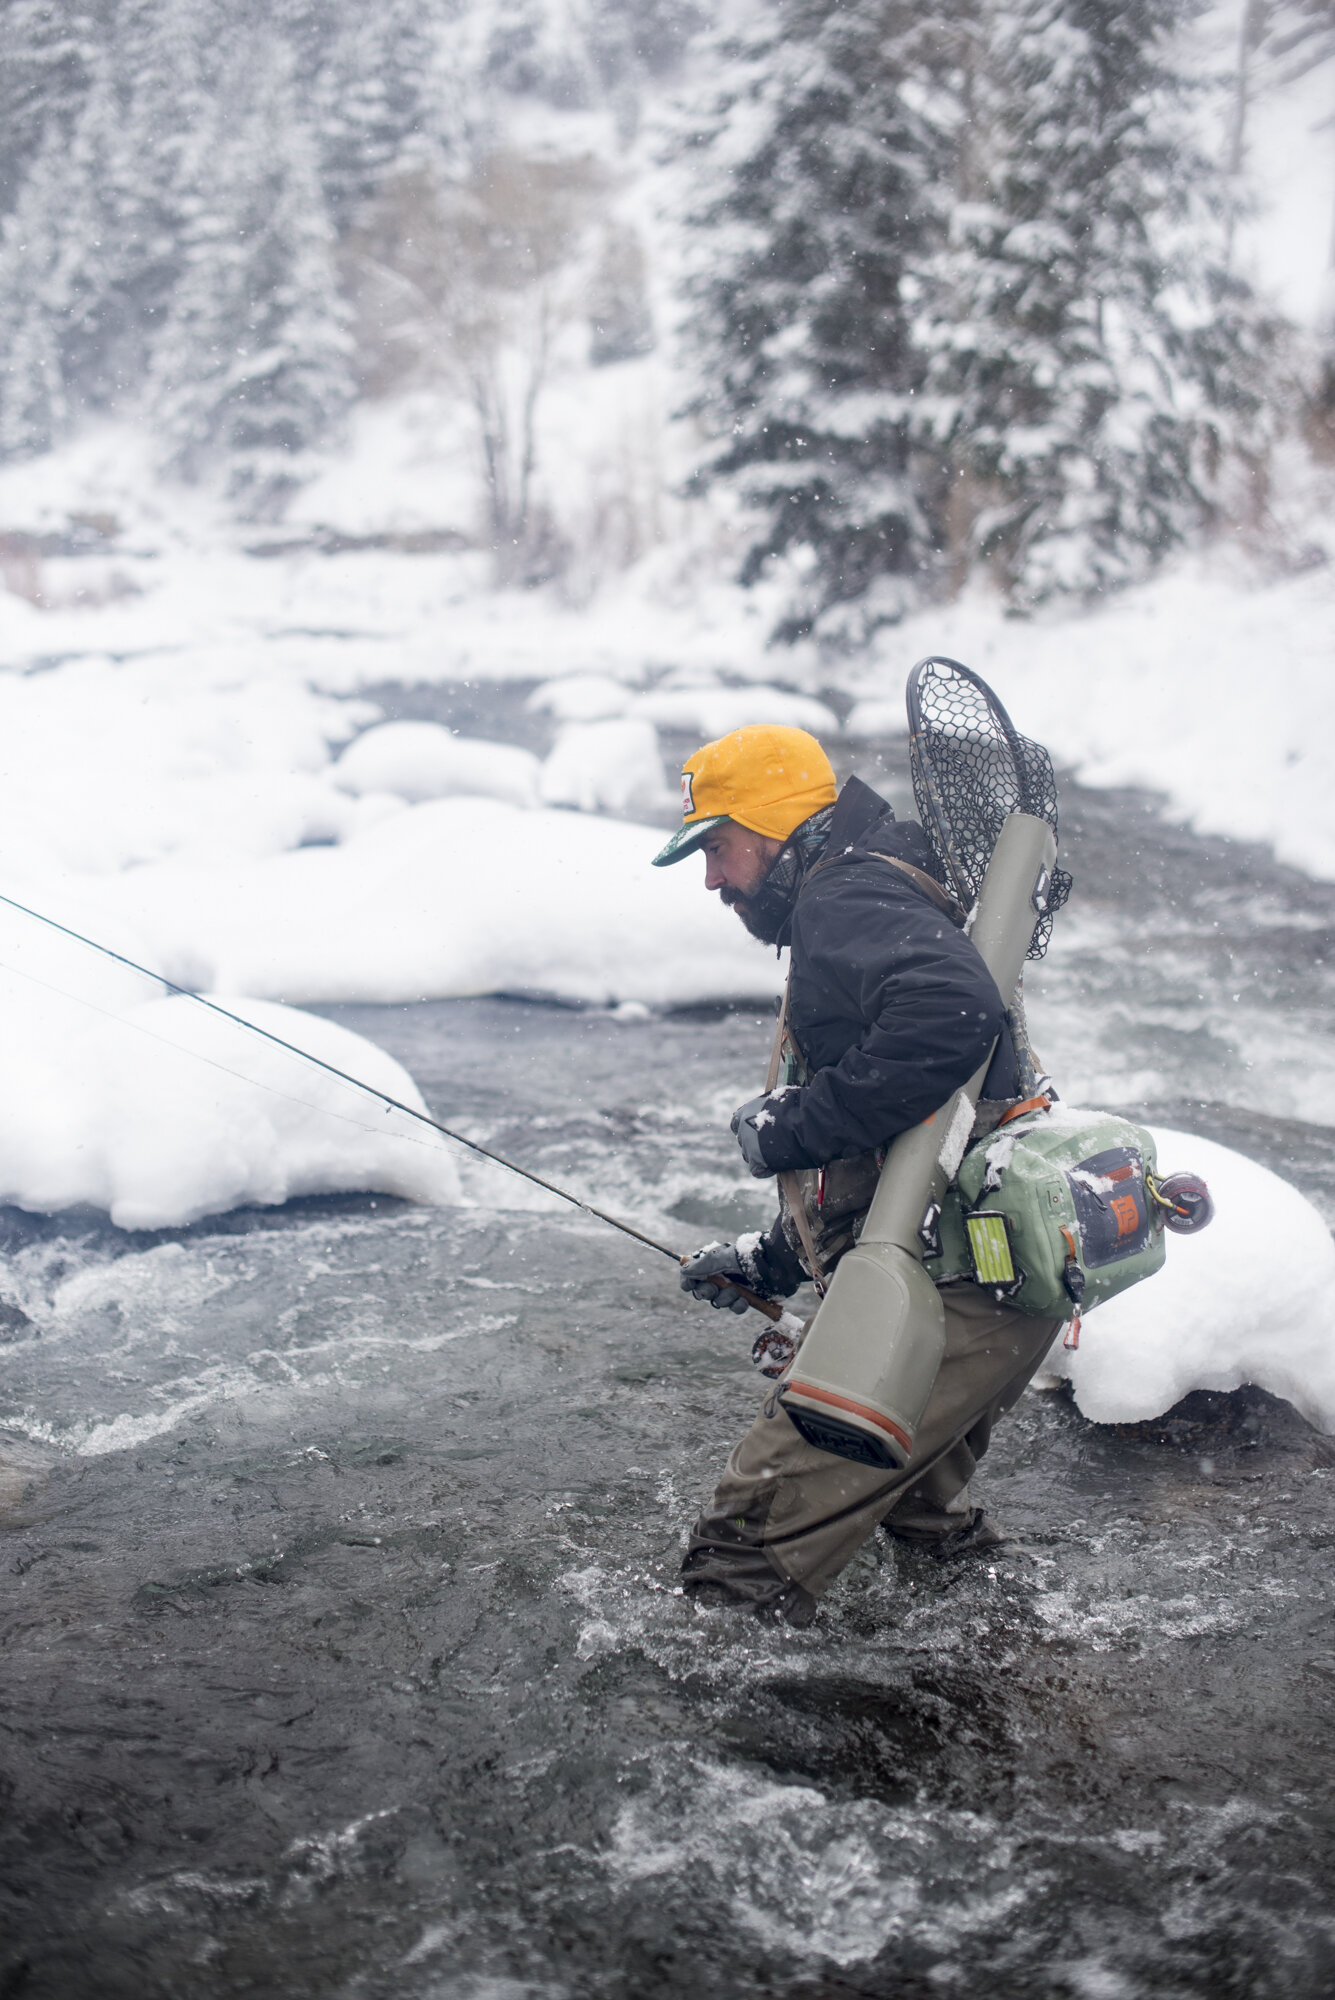  A fly fisherman crossing an icy stream in Colorado.  